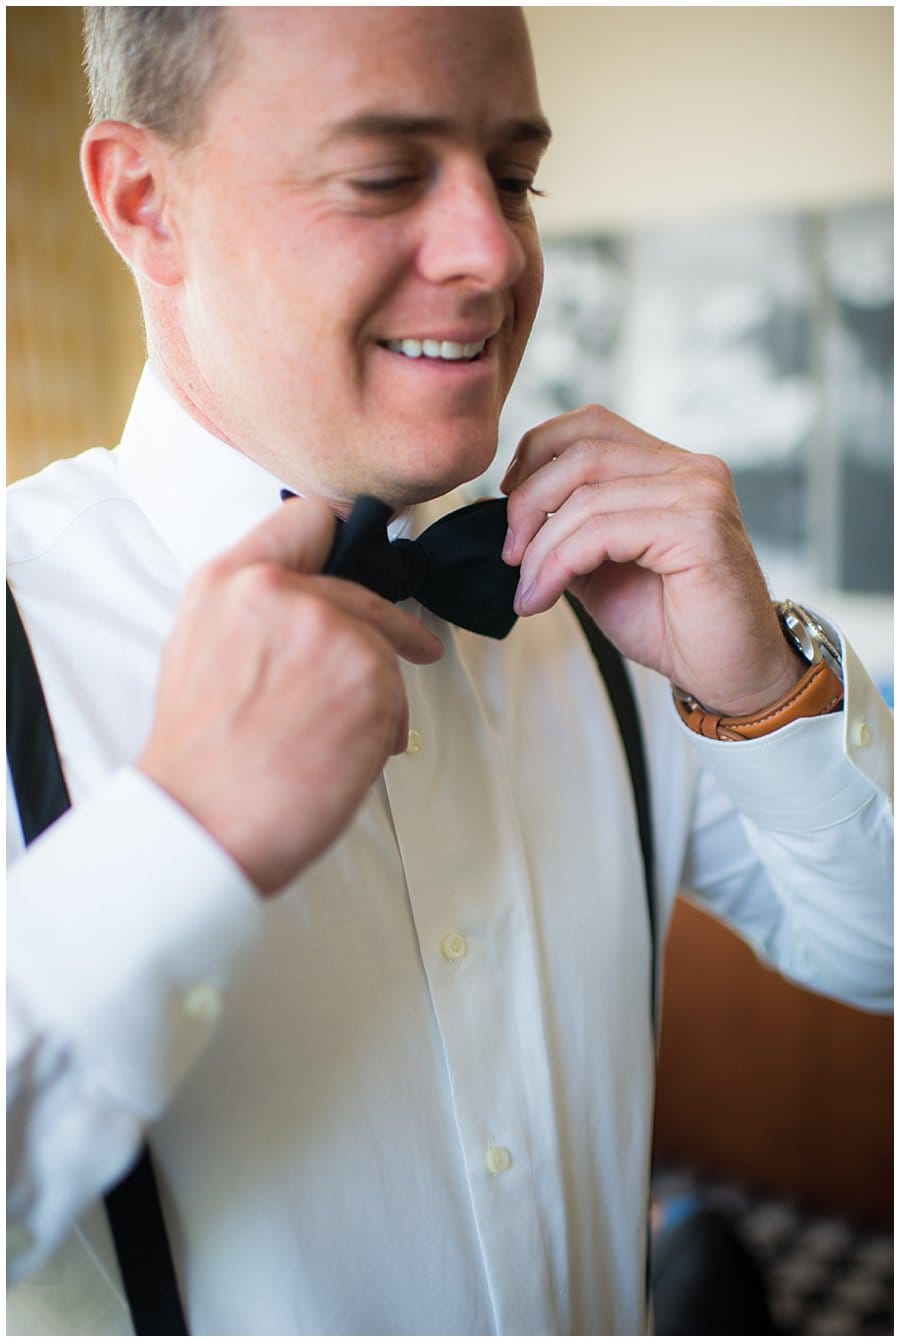 groom tying bow tie before wedding at blanc Denver wedding by Denver Wedding Photographer Jennie Crate Photographer